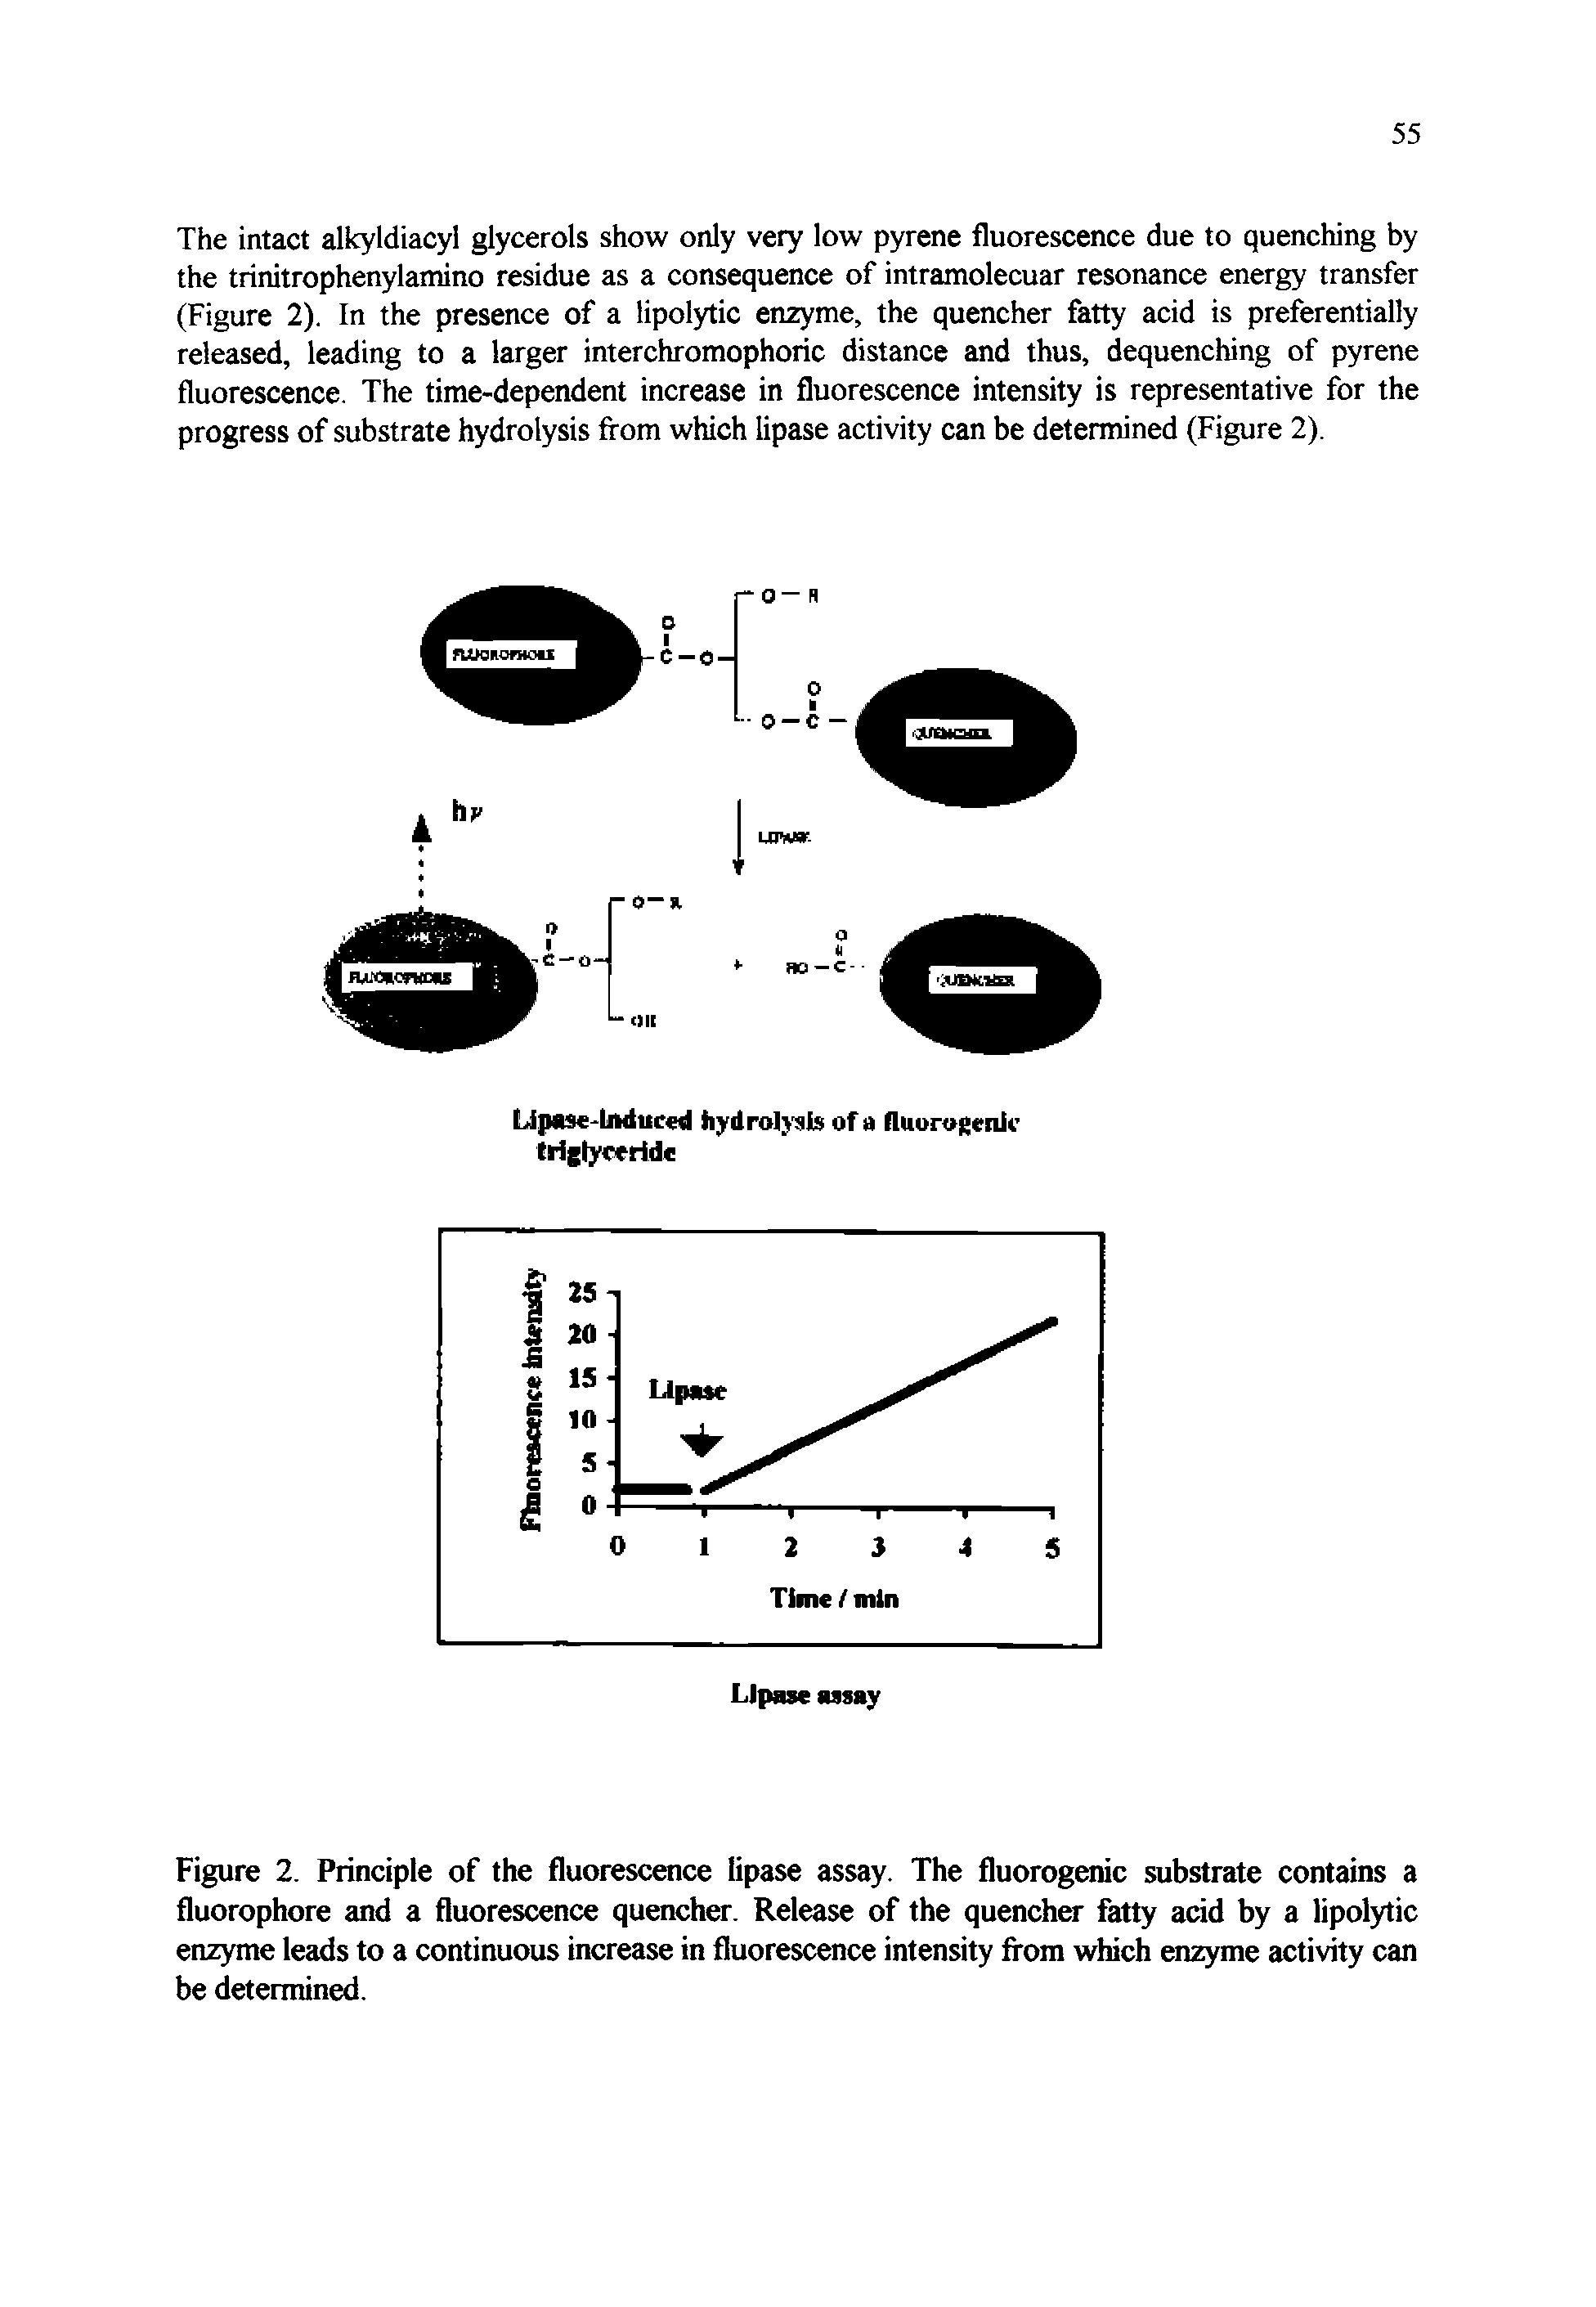 Figure 2. Principle of the fluorescence lipase assay. The fluorogenic substrate contains a fluorophore and a fluorescence quencher. Release of the quencher fatty acid by a lipolytic enzyme leads to a continuous increase in fluorescence intensity from which enzyme activity can be determined.